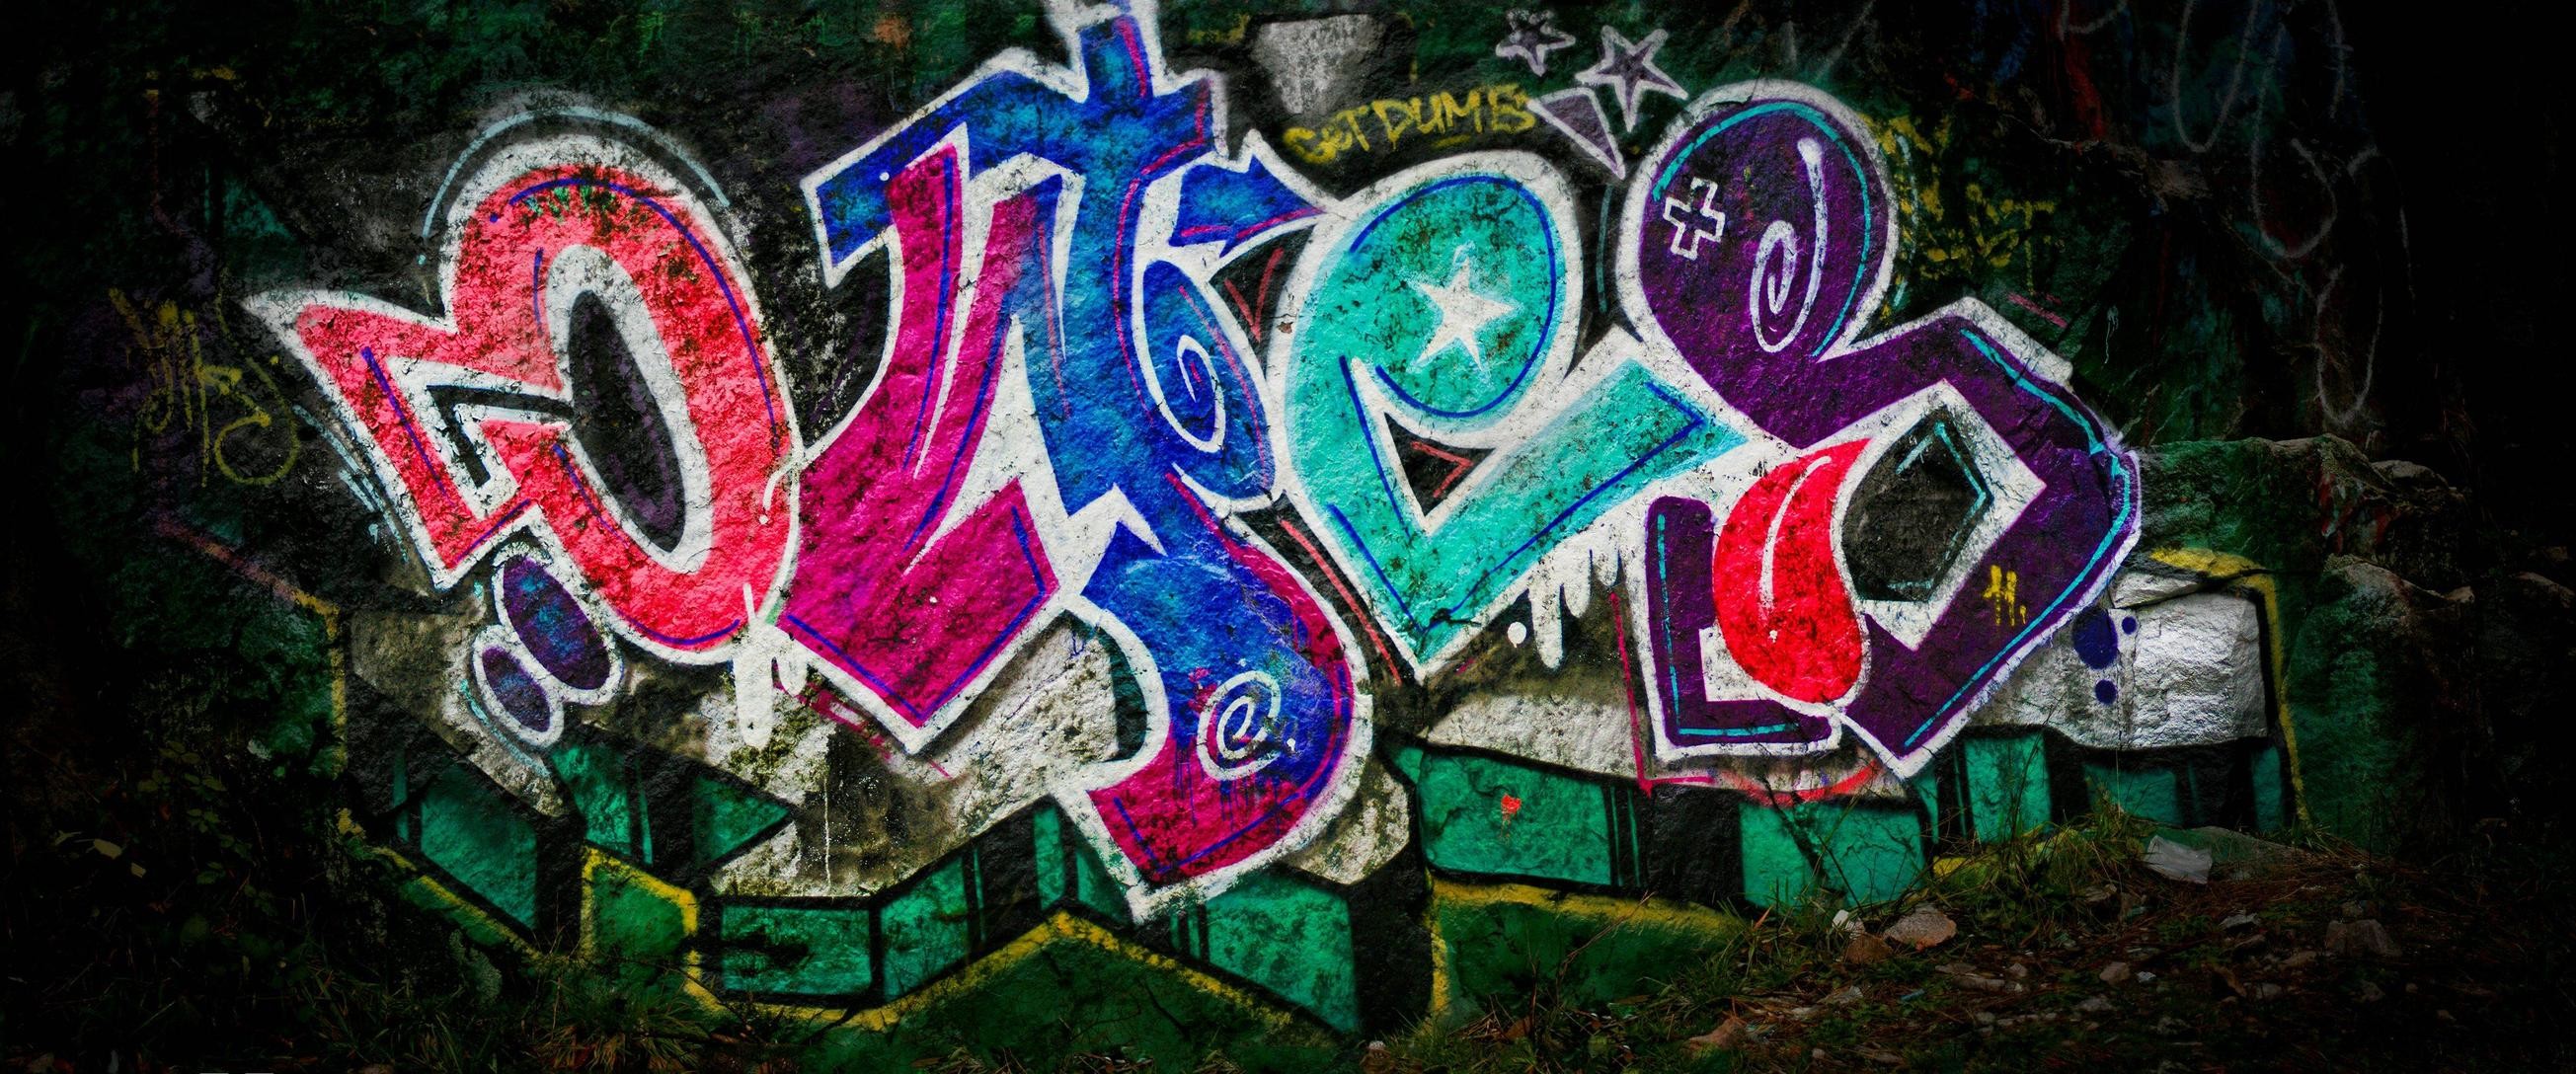 2609x1088 Awesome Dual Monitor Wallpaper of some graffiti near my house i made the  other day (Xpost from r/pics) ...